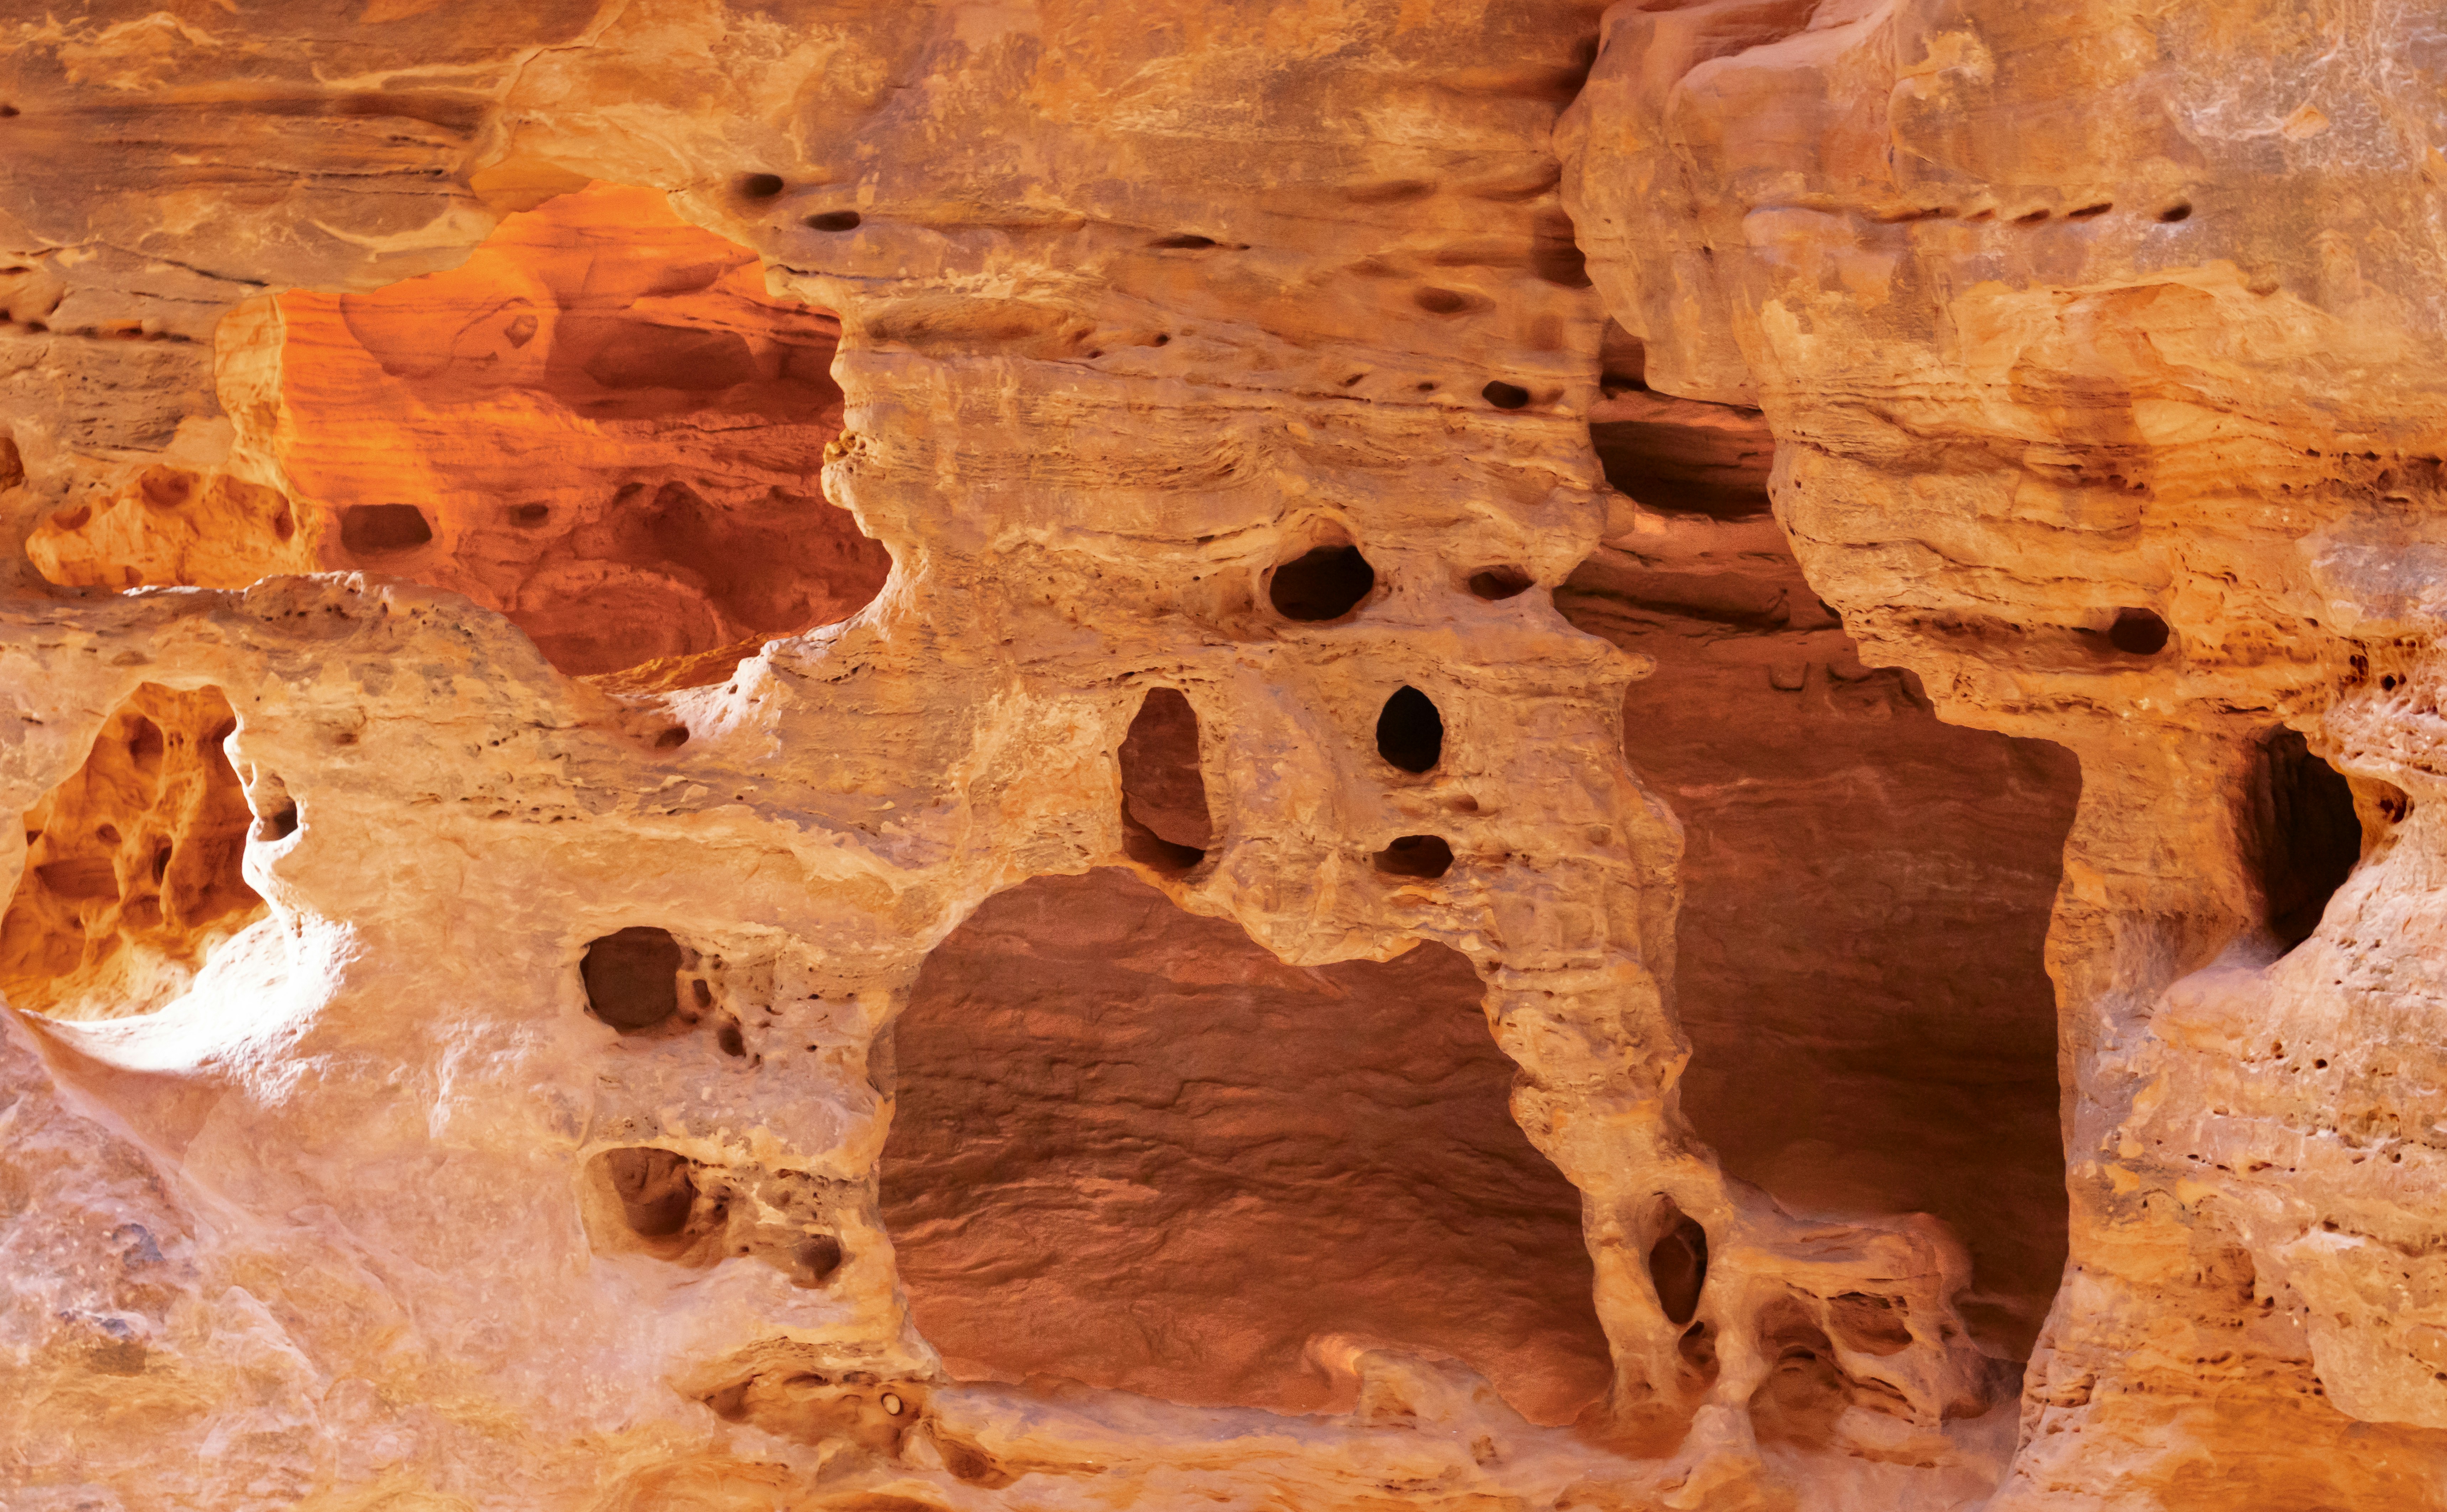 Lacy erosion patterns on Jenny's Canyon wall are located in Snow Canyon State Park near St. George, Utah.